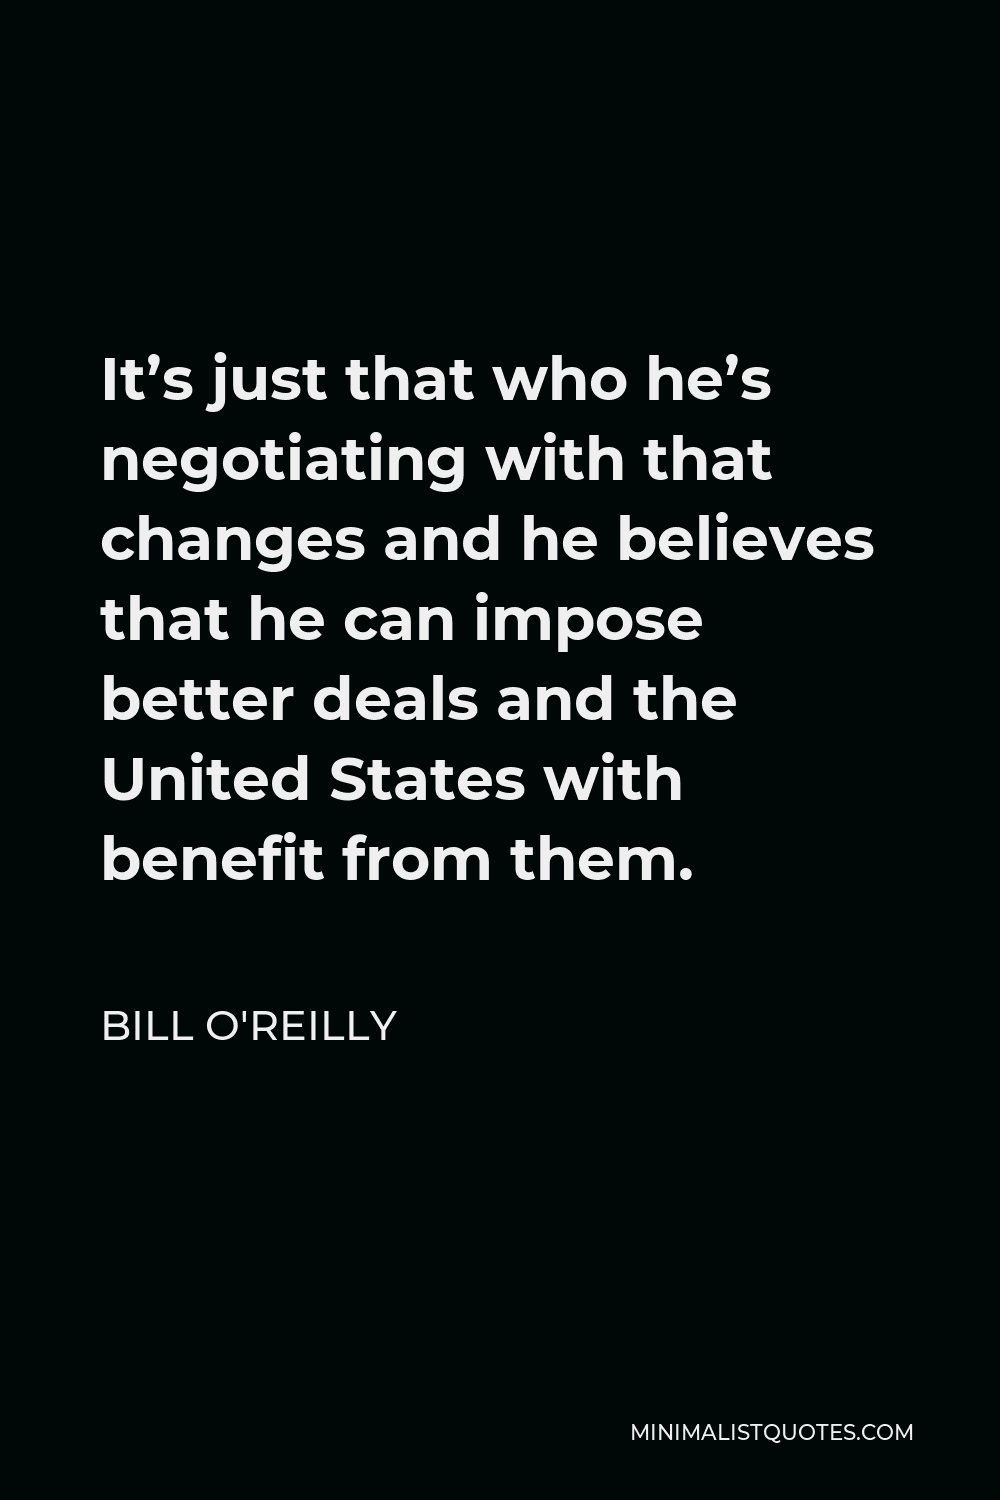 Bill O'Reilly Quote - It’s just that who he’s negotiating with that changes and he believes that he can impose better deals and the United States with benefit from them.